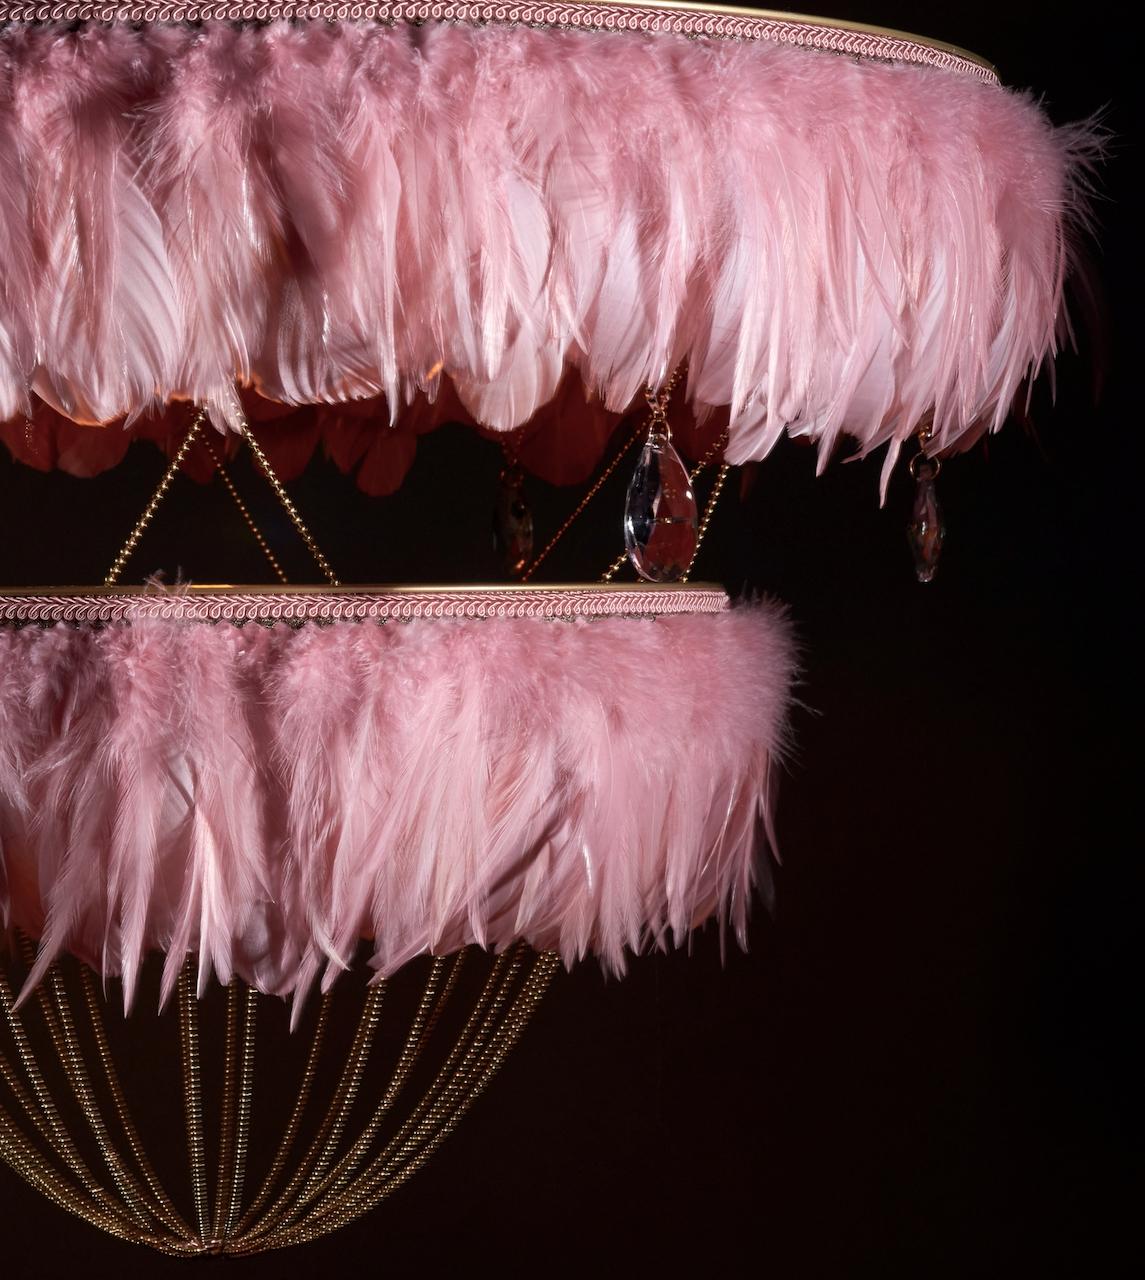 Contemporary Feather Chandelier in Flamingo Pink  - Bertie -  Hand Made to order in London.  For Sale